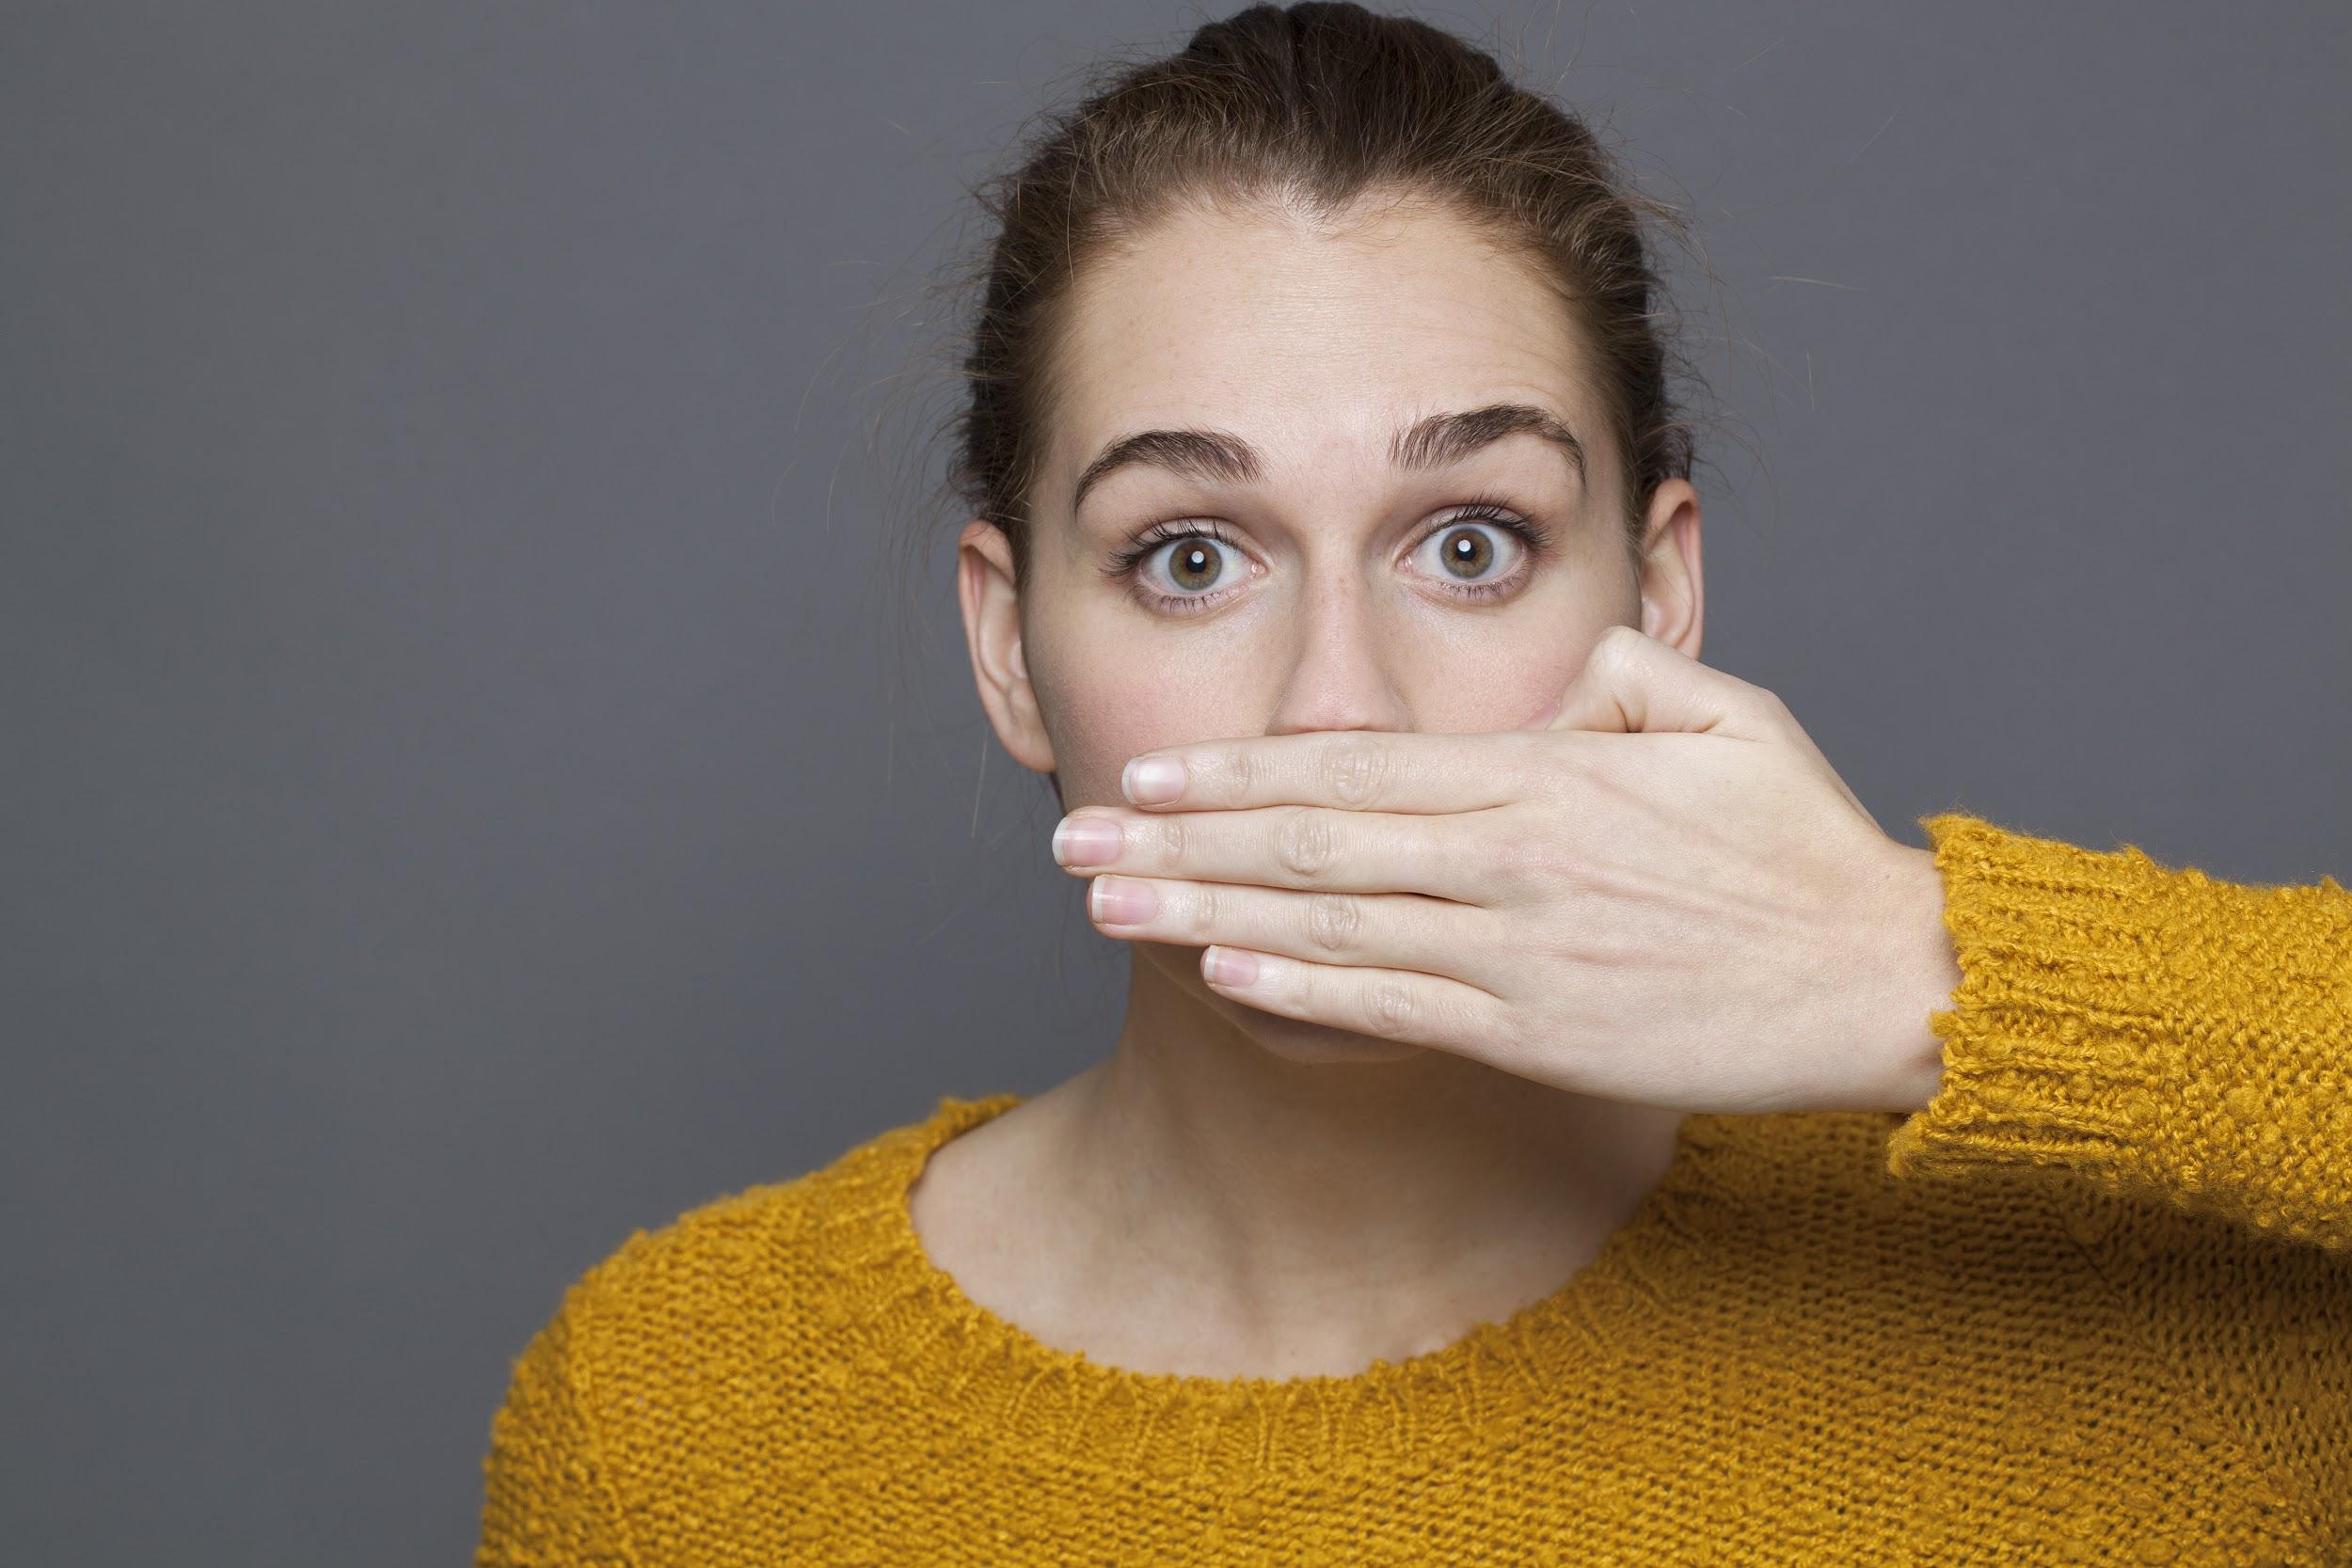  How Can I Get Rid Of Bad Breath?